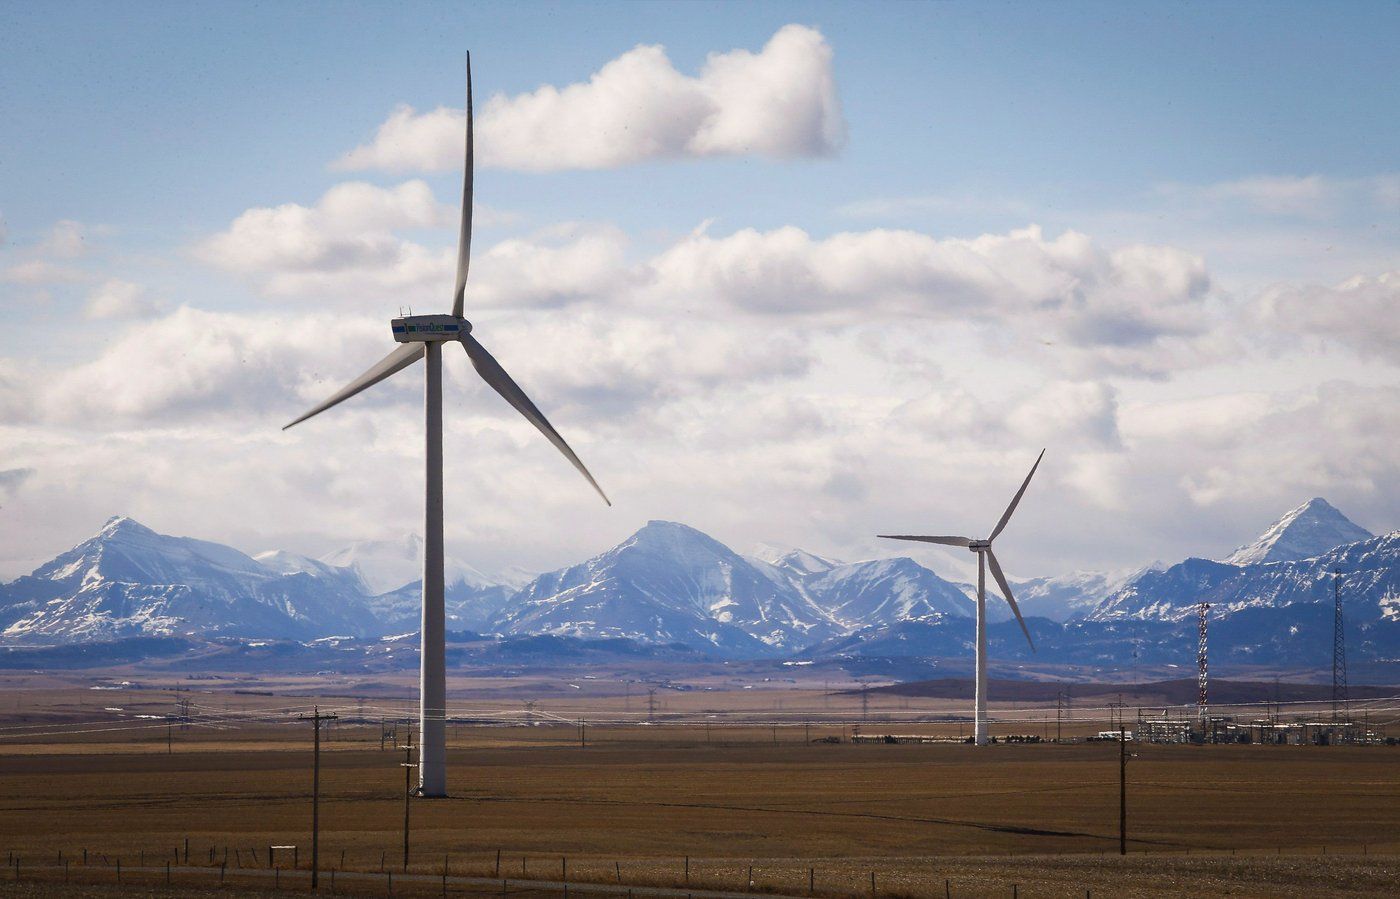 TransAlta going greener as it maps out $3.5B in spending, mainly on renewables